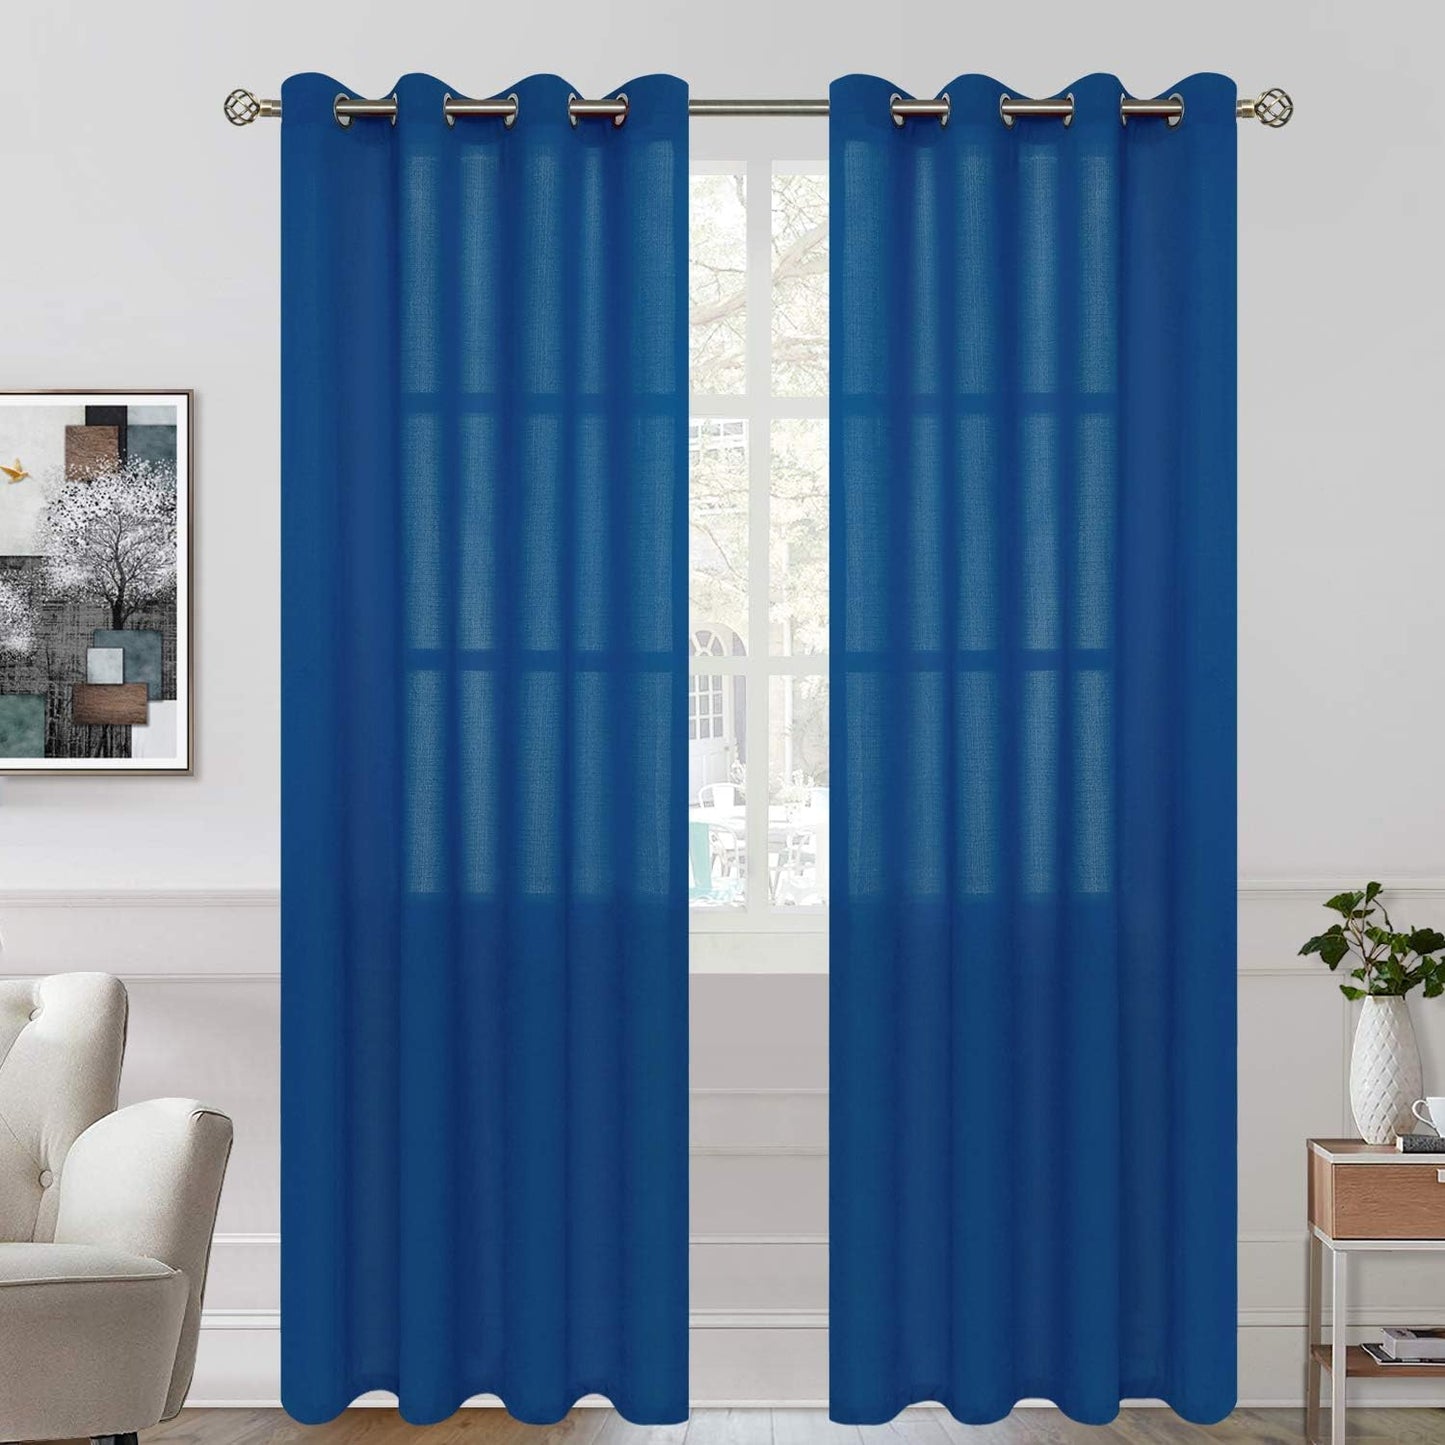 Bgment Natural Linen Look Semi Sheer Curtains for Bedroom, 52 X 54 Inch White Grommet Light Filtering Casual Textured Privacy Curtains for Bay Window, 2 Panels  BGment Classic Blue 52W X 95L 